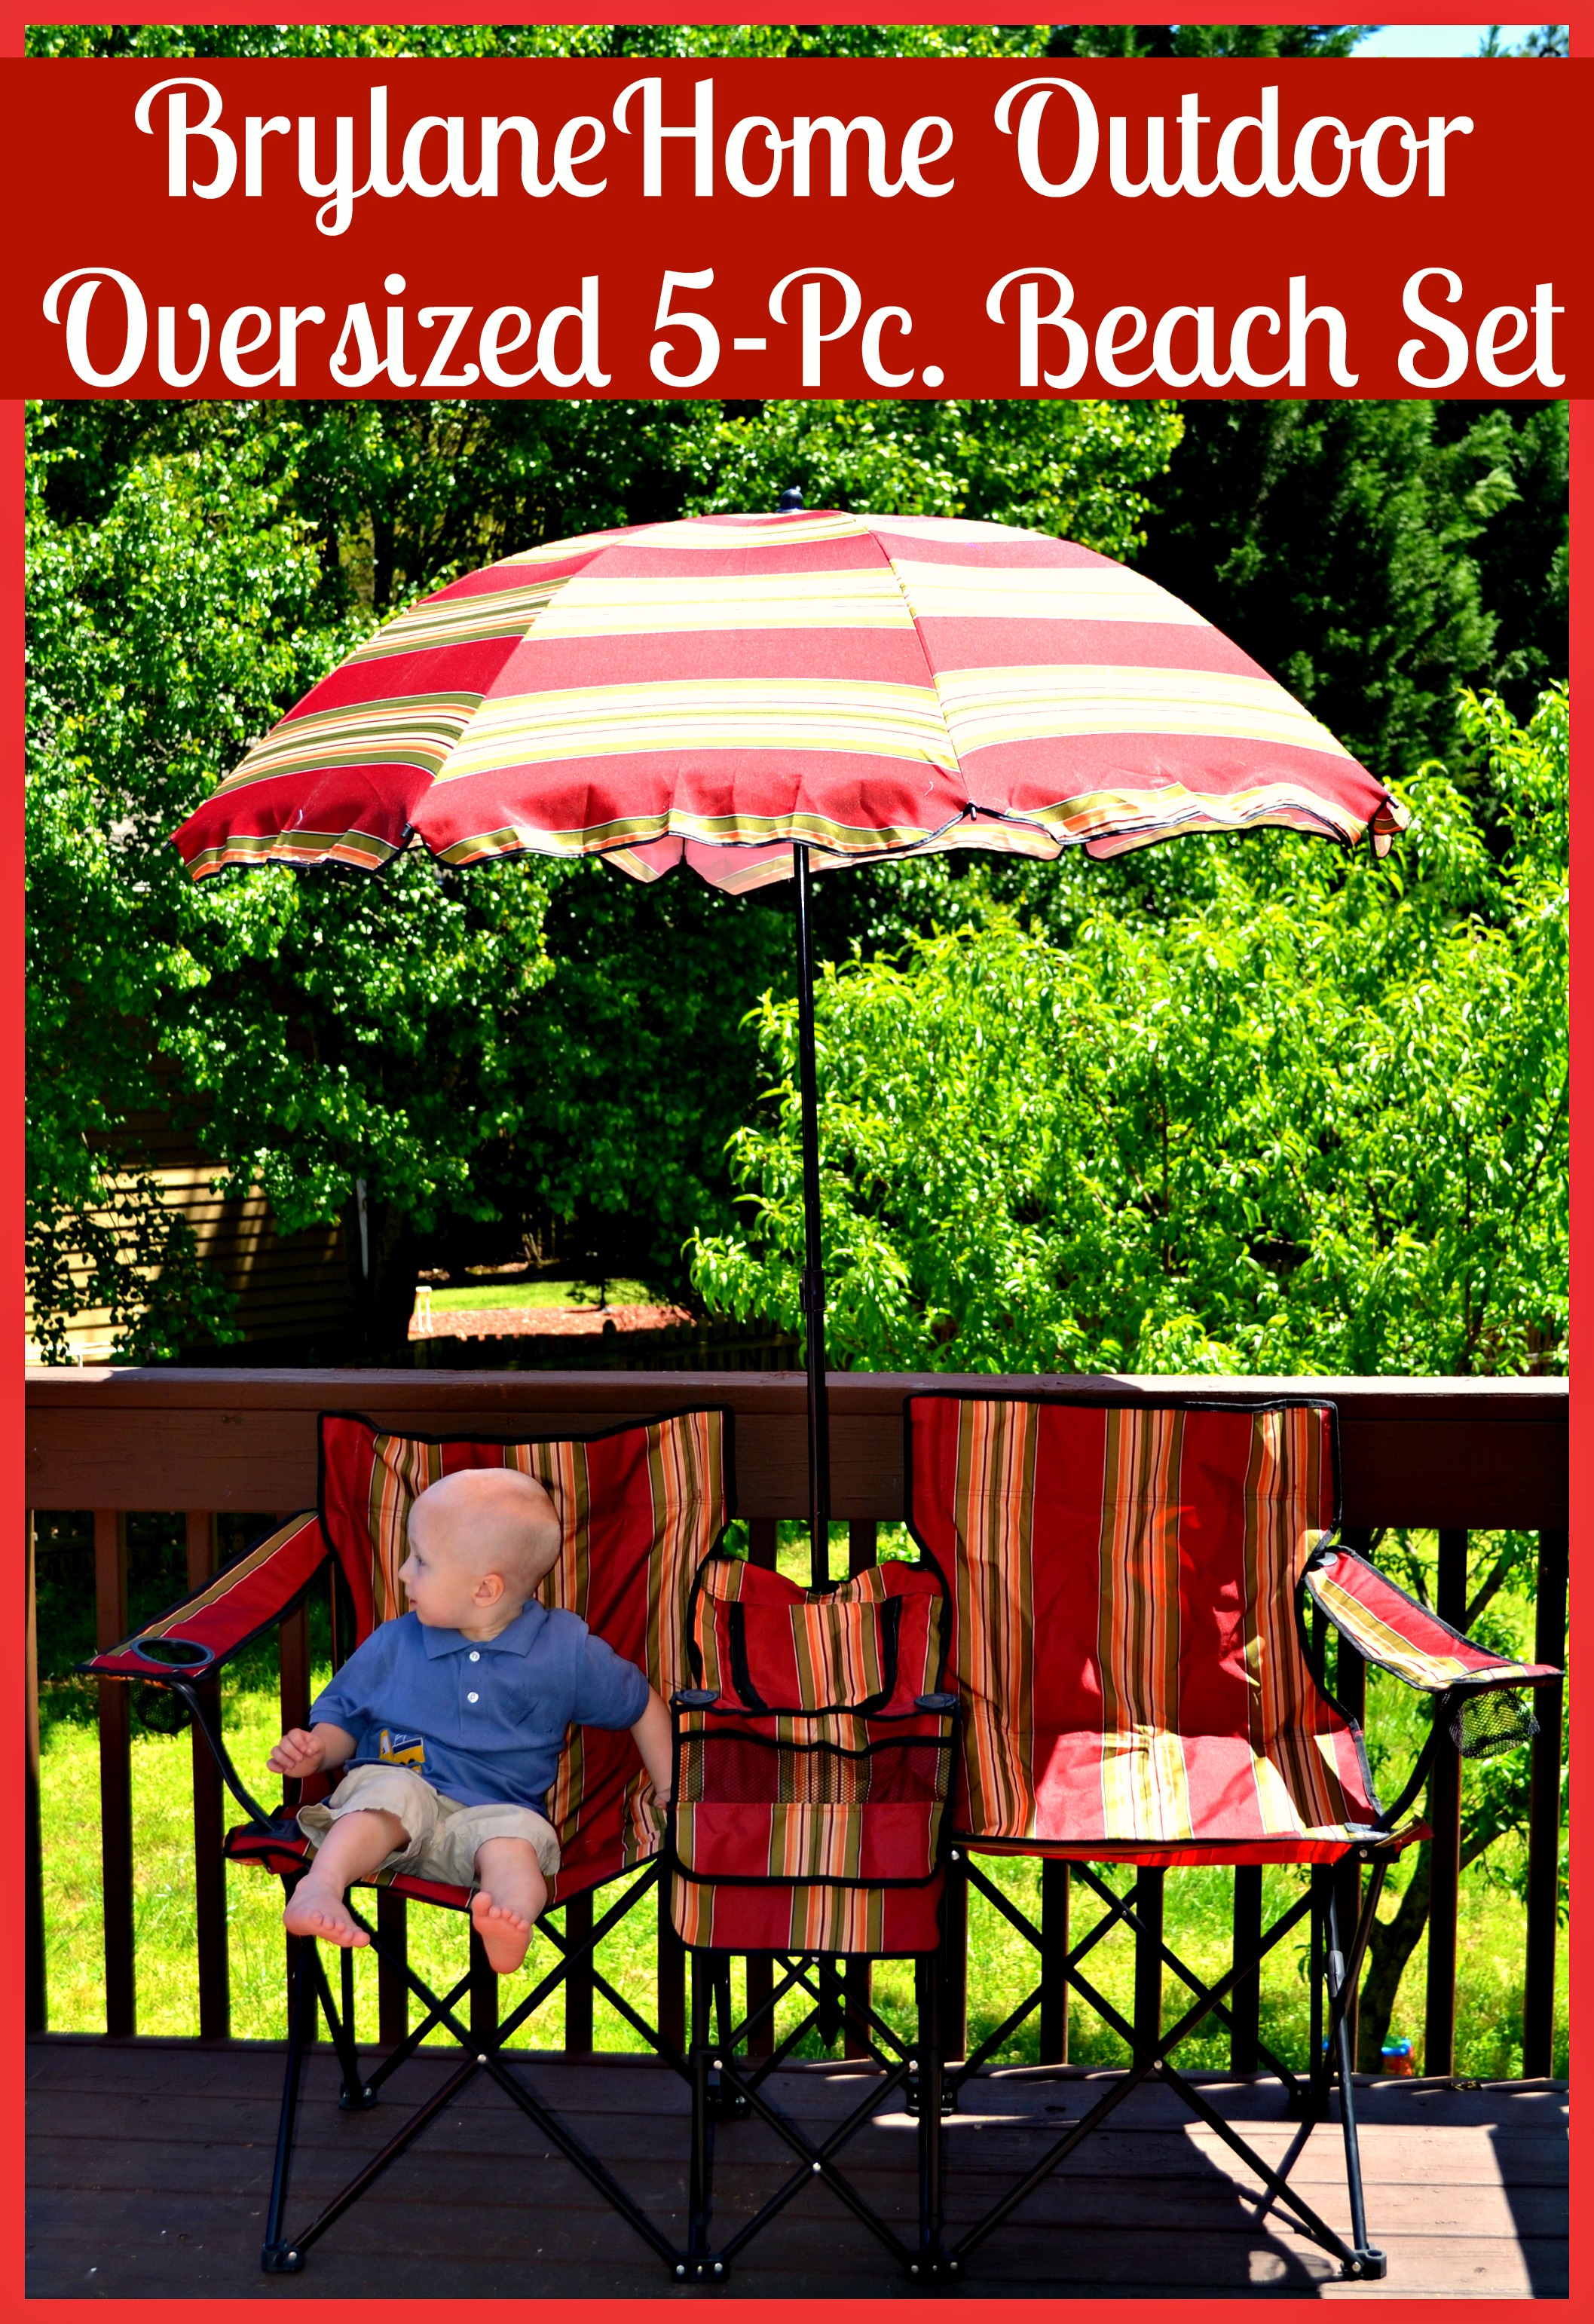 BrylaneHome Outdoor Oversized 5-Pc. Beach Set Review